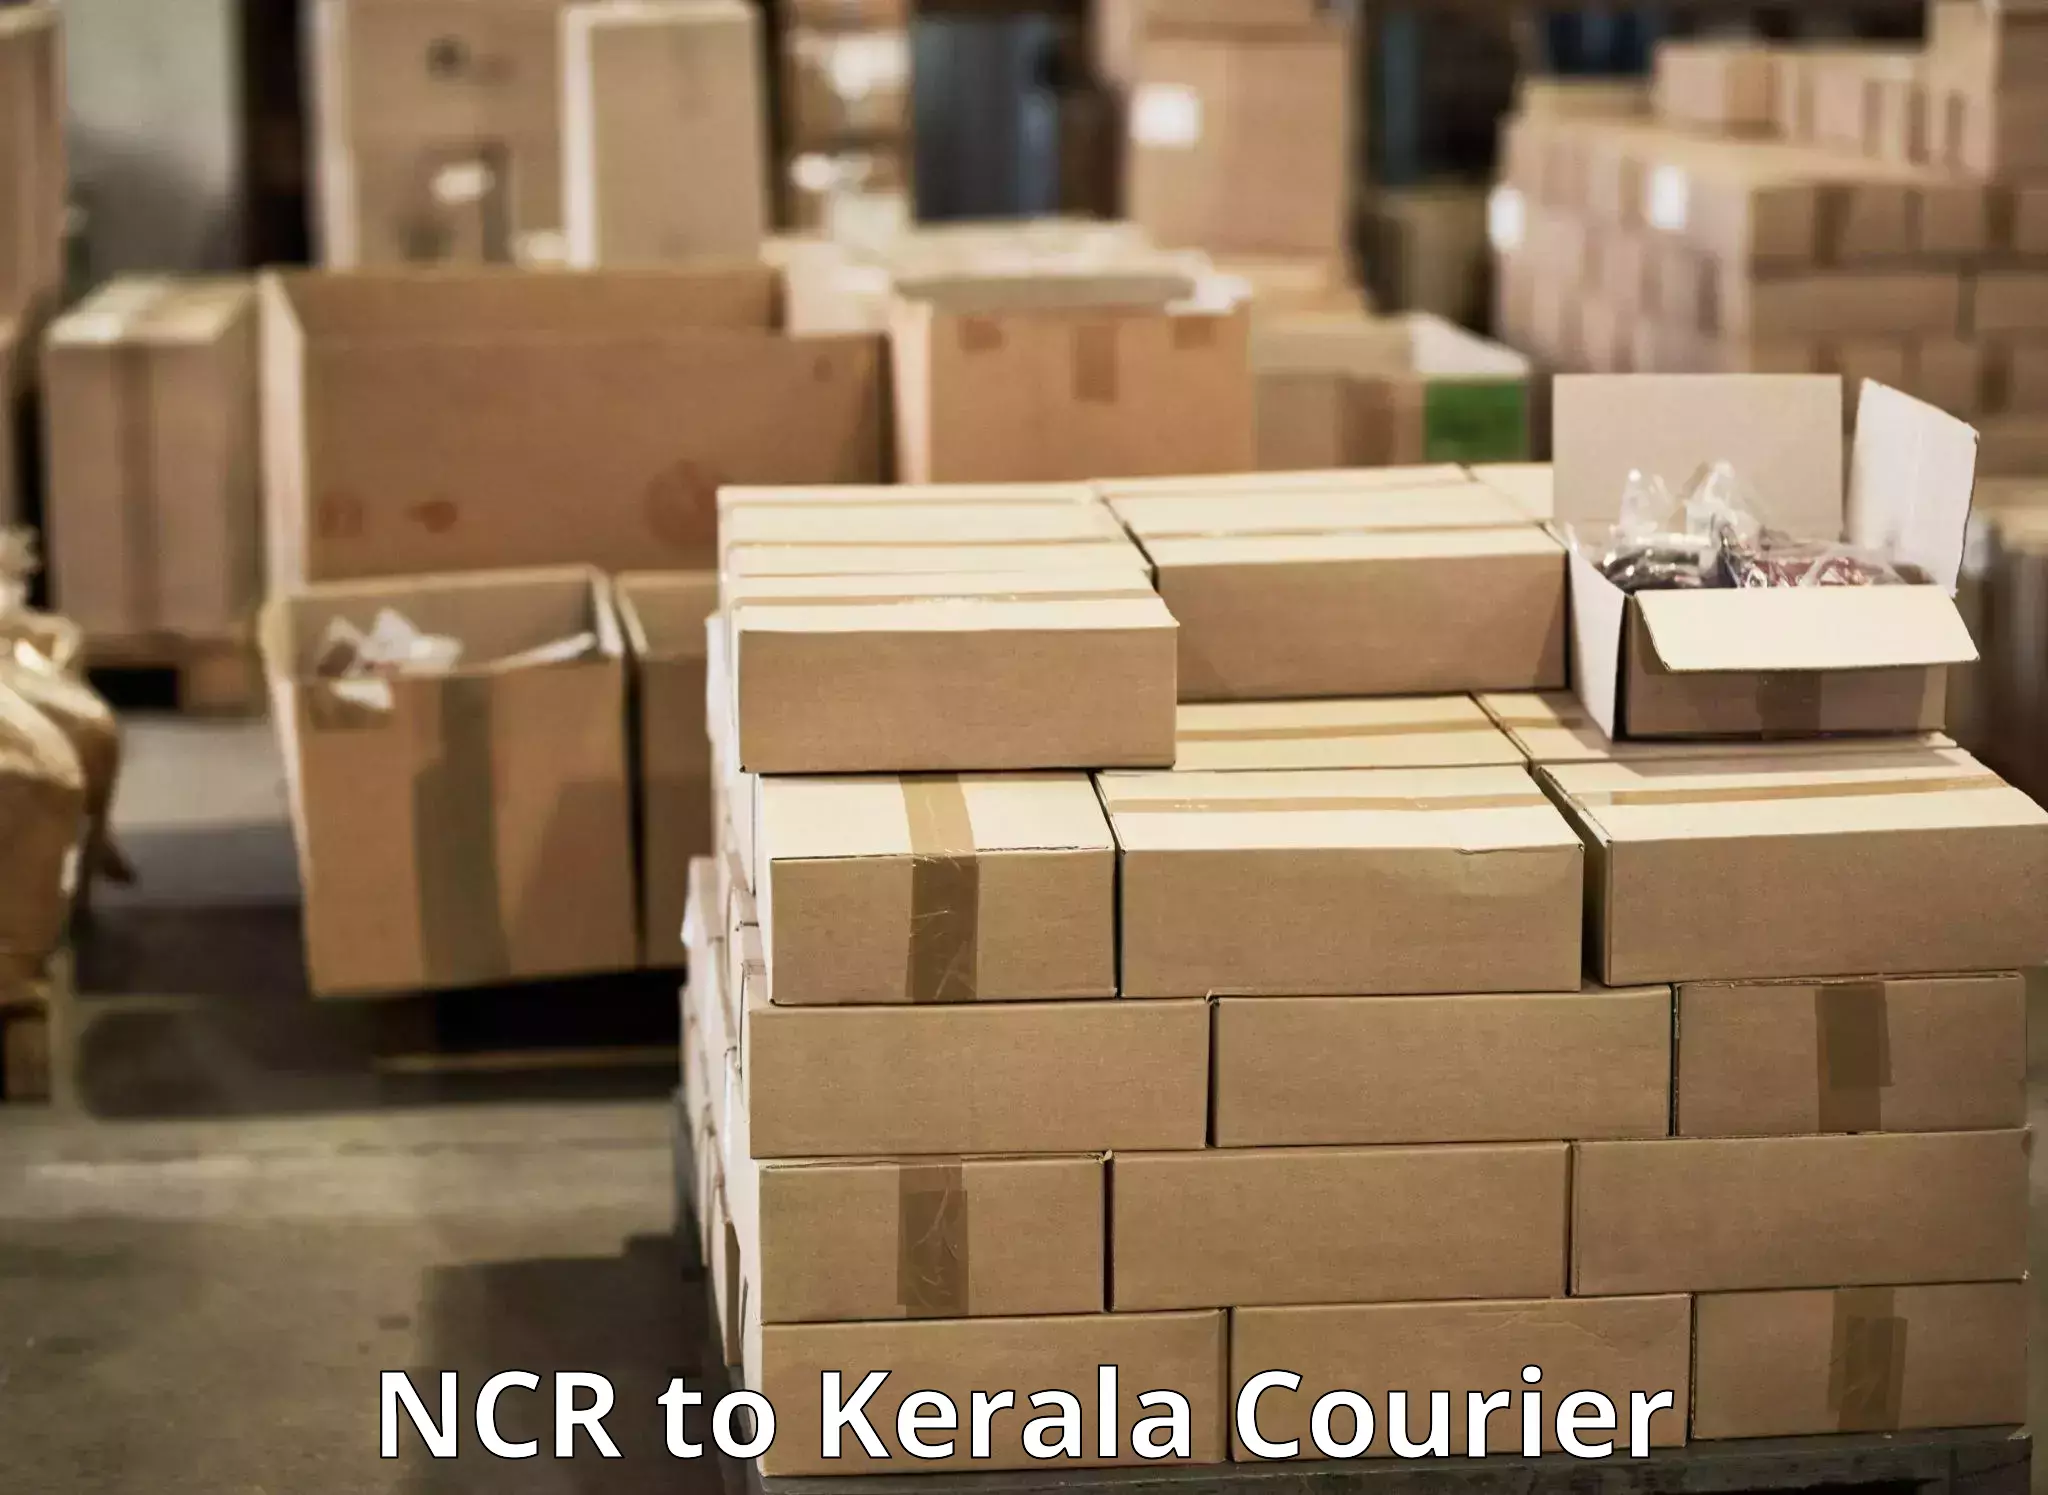 Speedy delivery service in NCR to Kerala